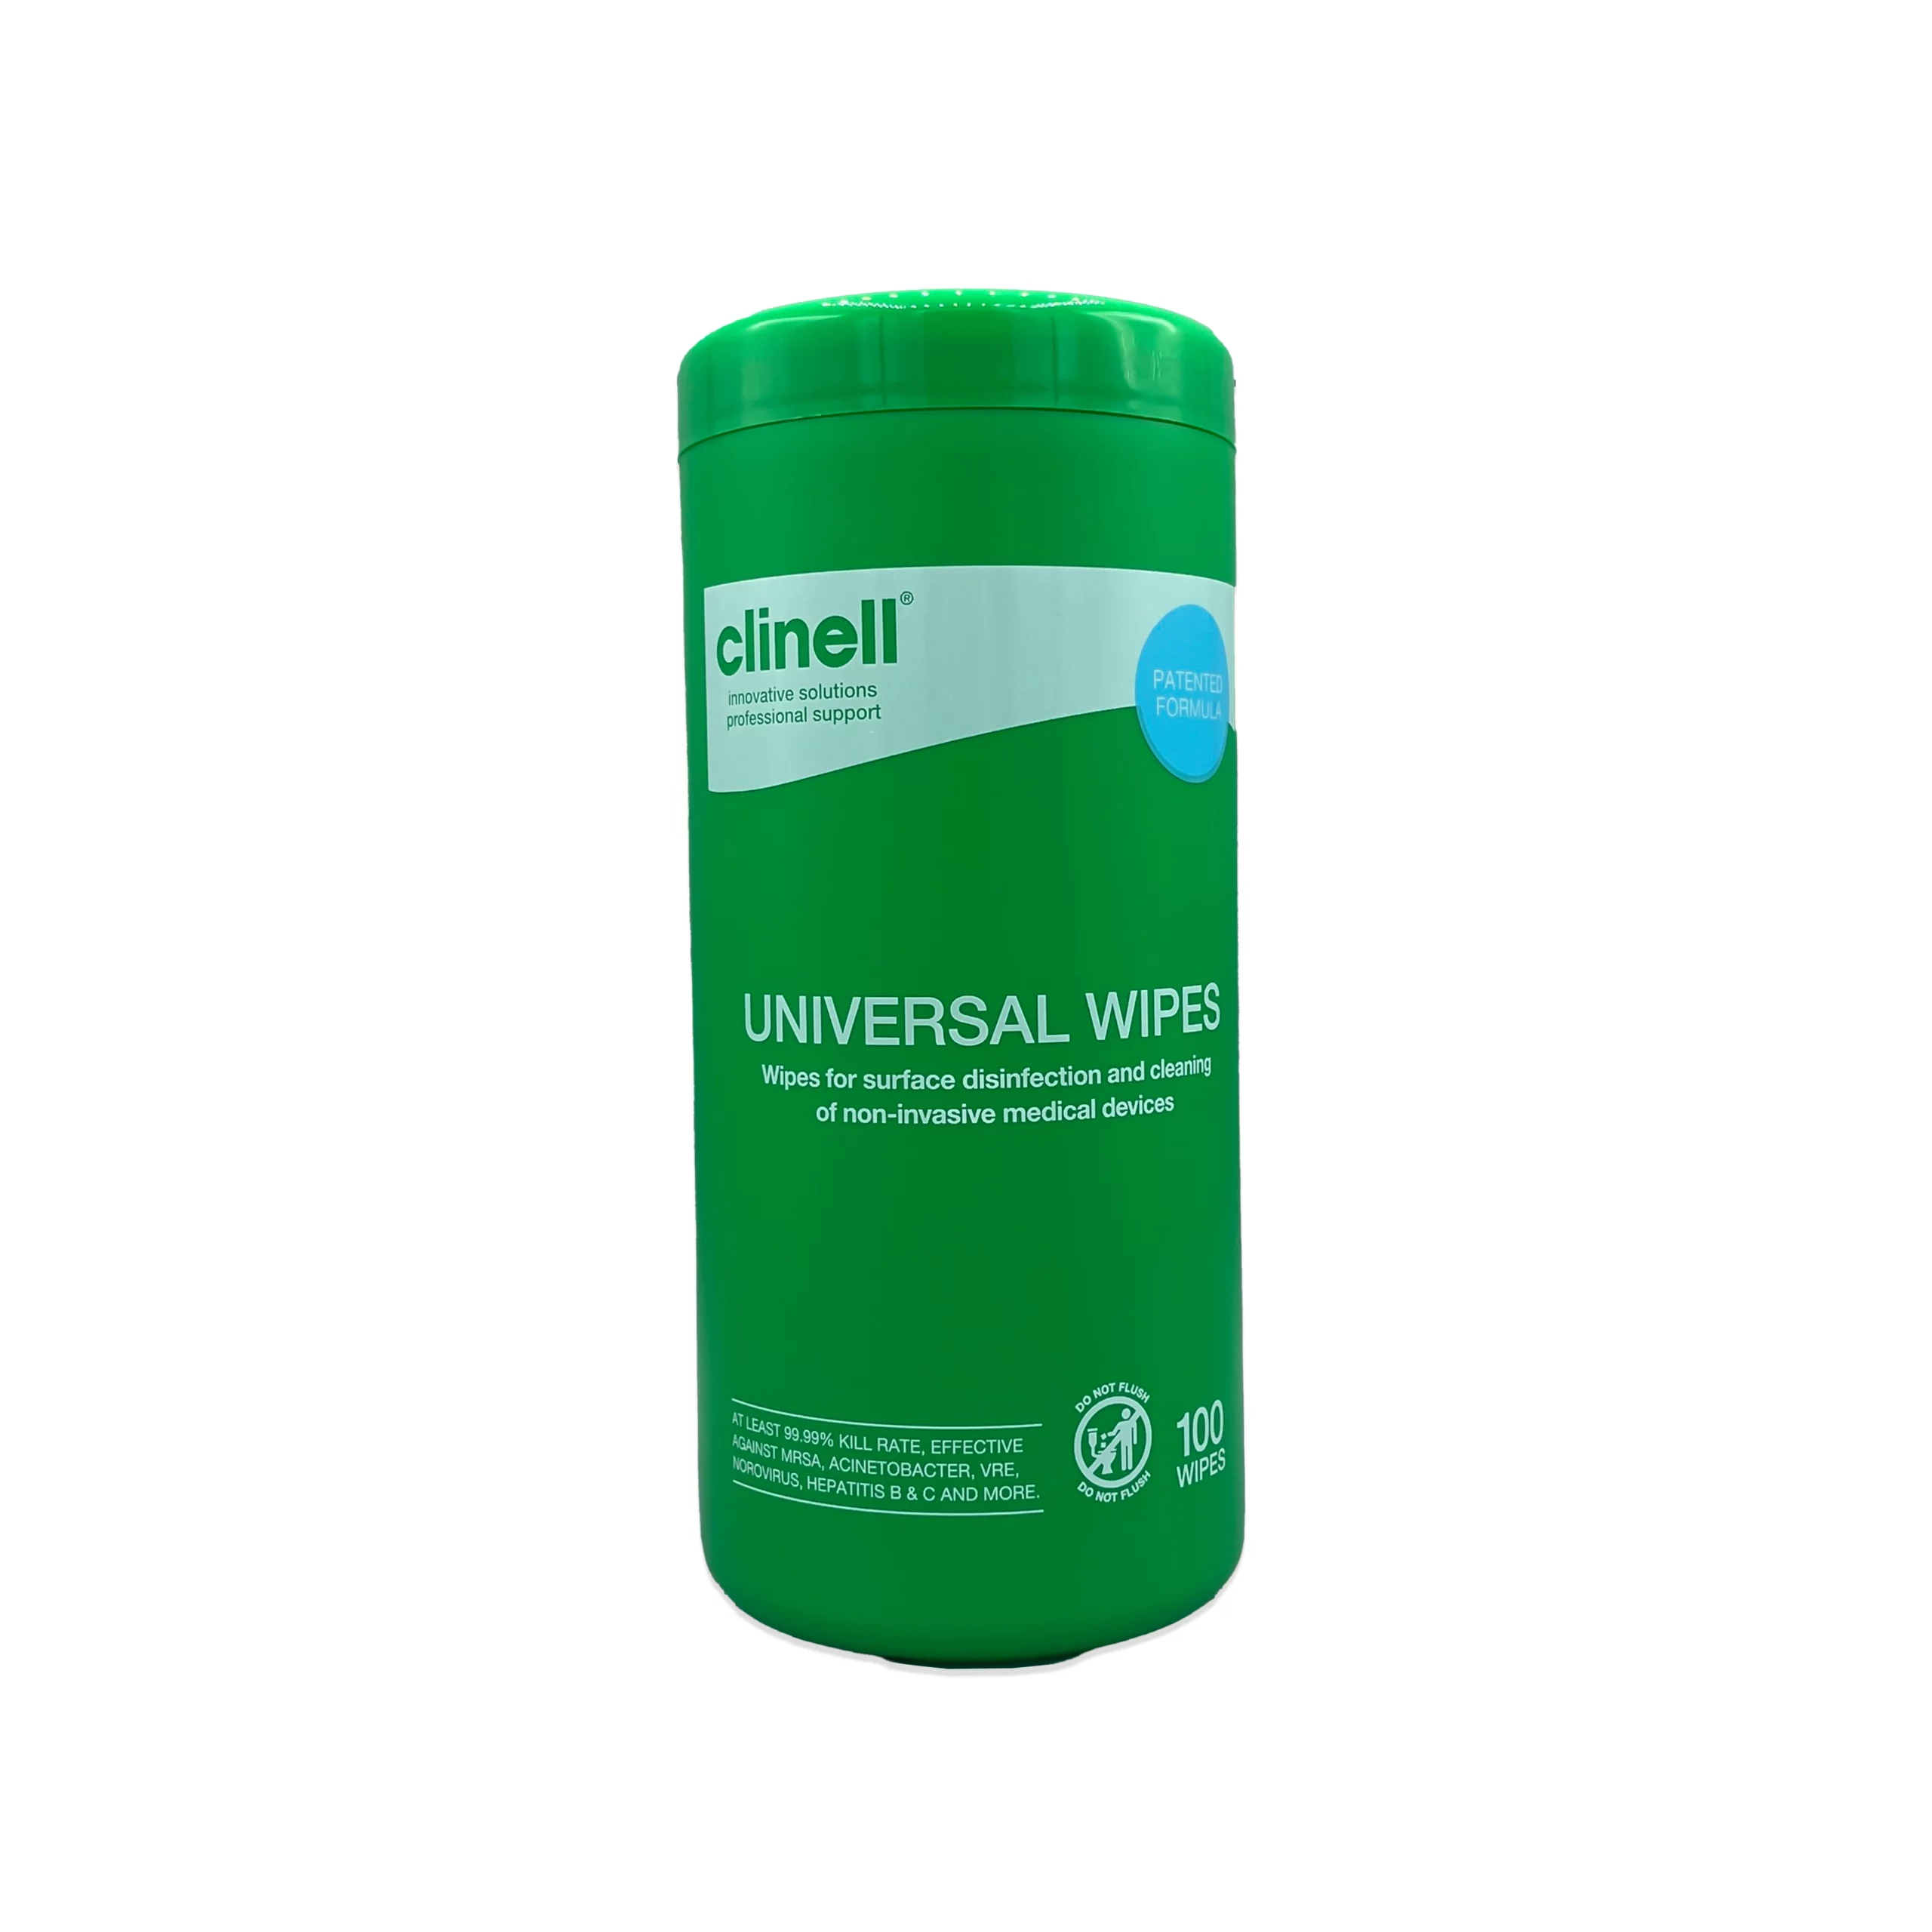 Clinell Universal Wipes (100)